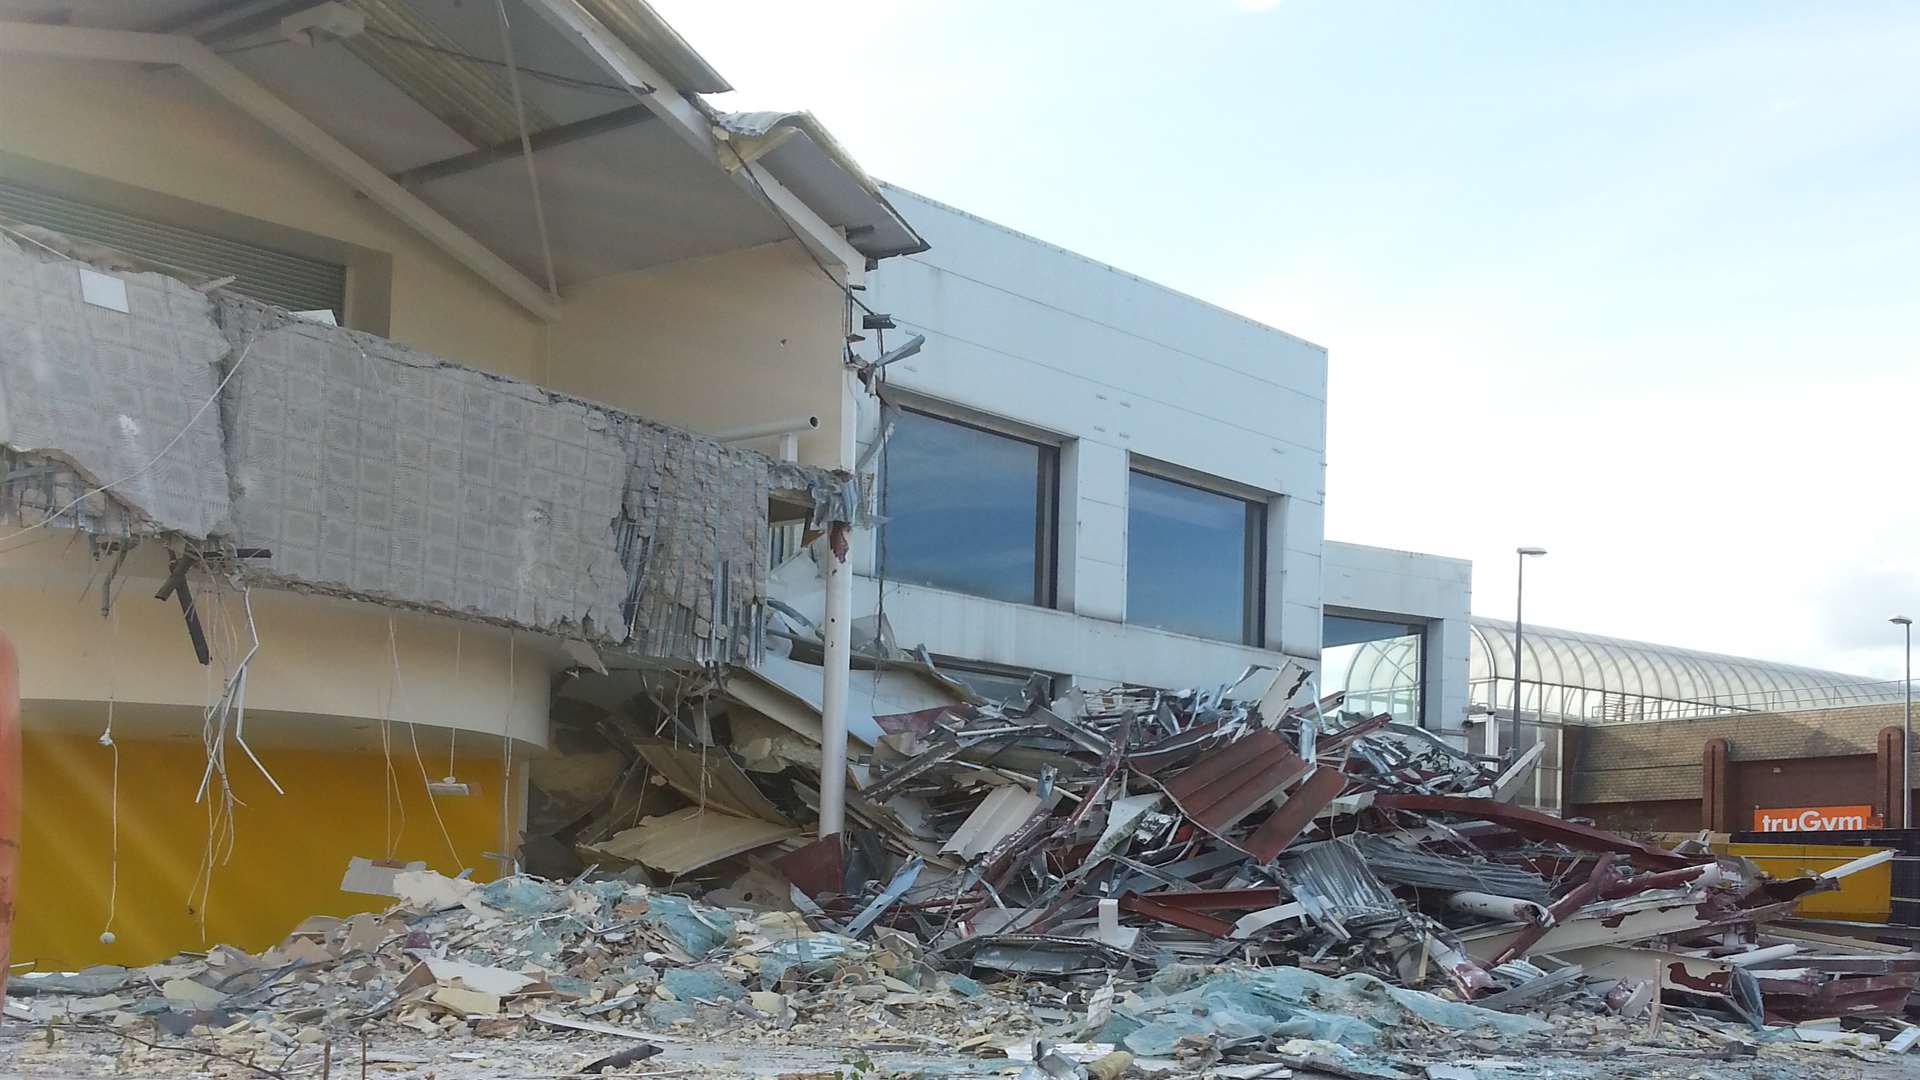 The former Renault garage on the corner of Barker Road and Tonbridge Road comes tumbling down